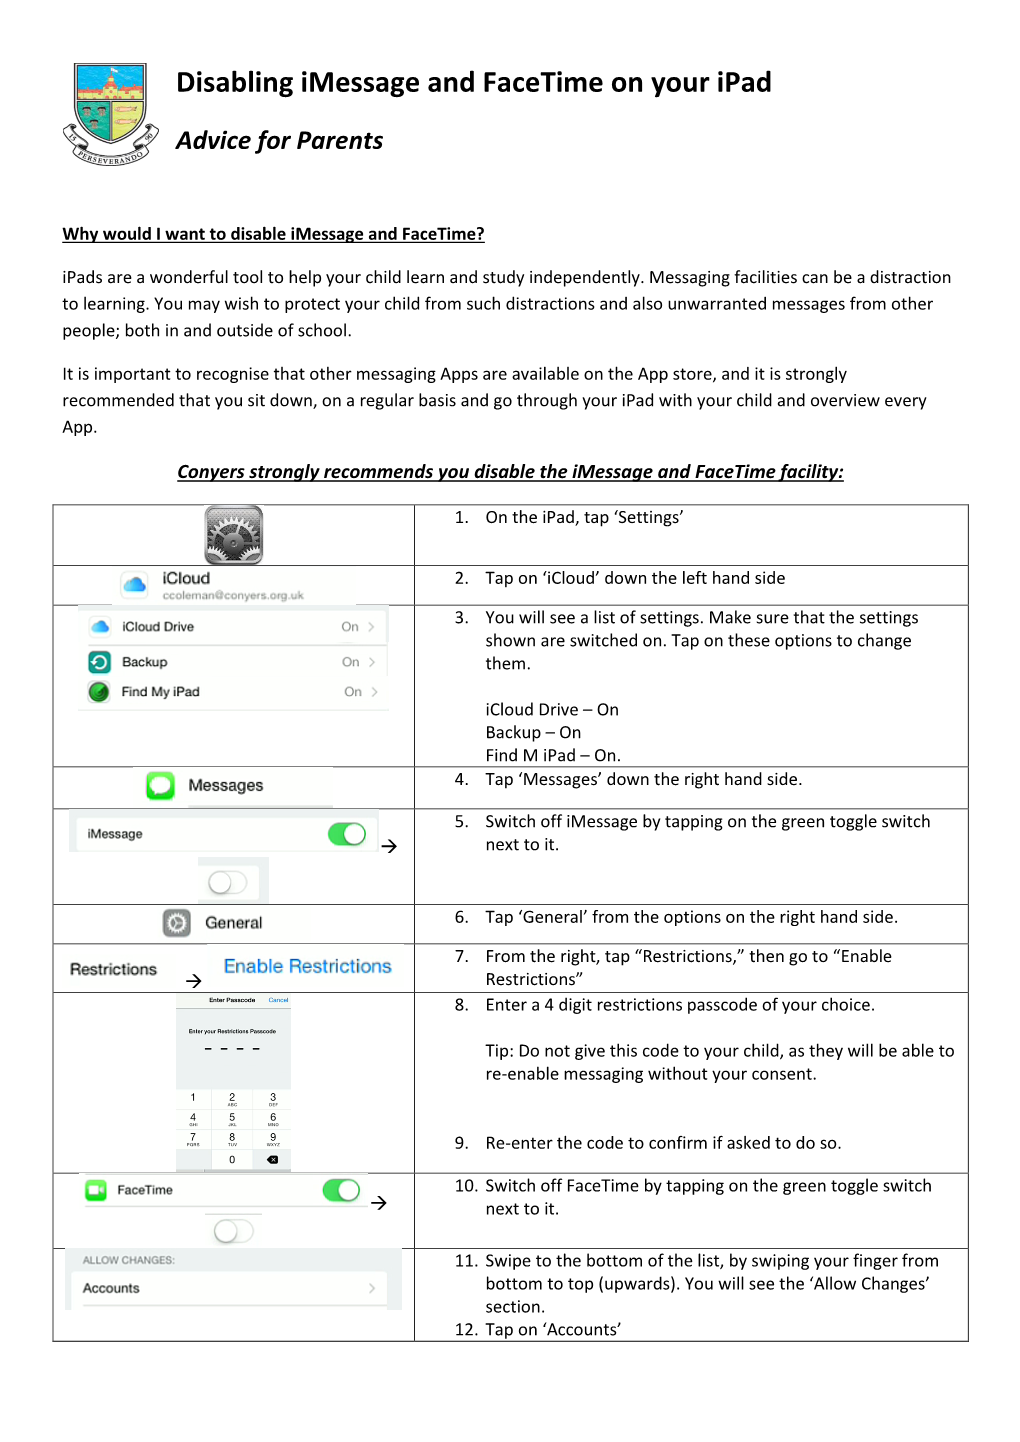 Disabling Imessage and Facetime on Your Ipad Click the Link Below to View the Attached